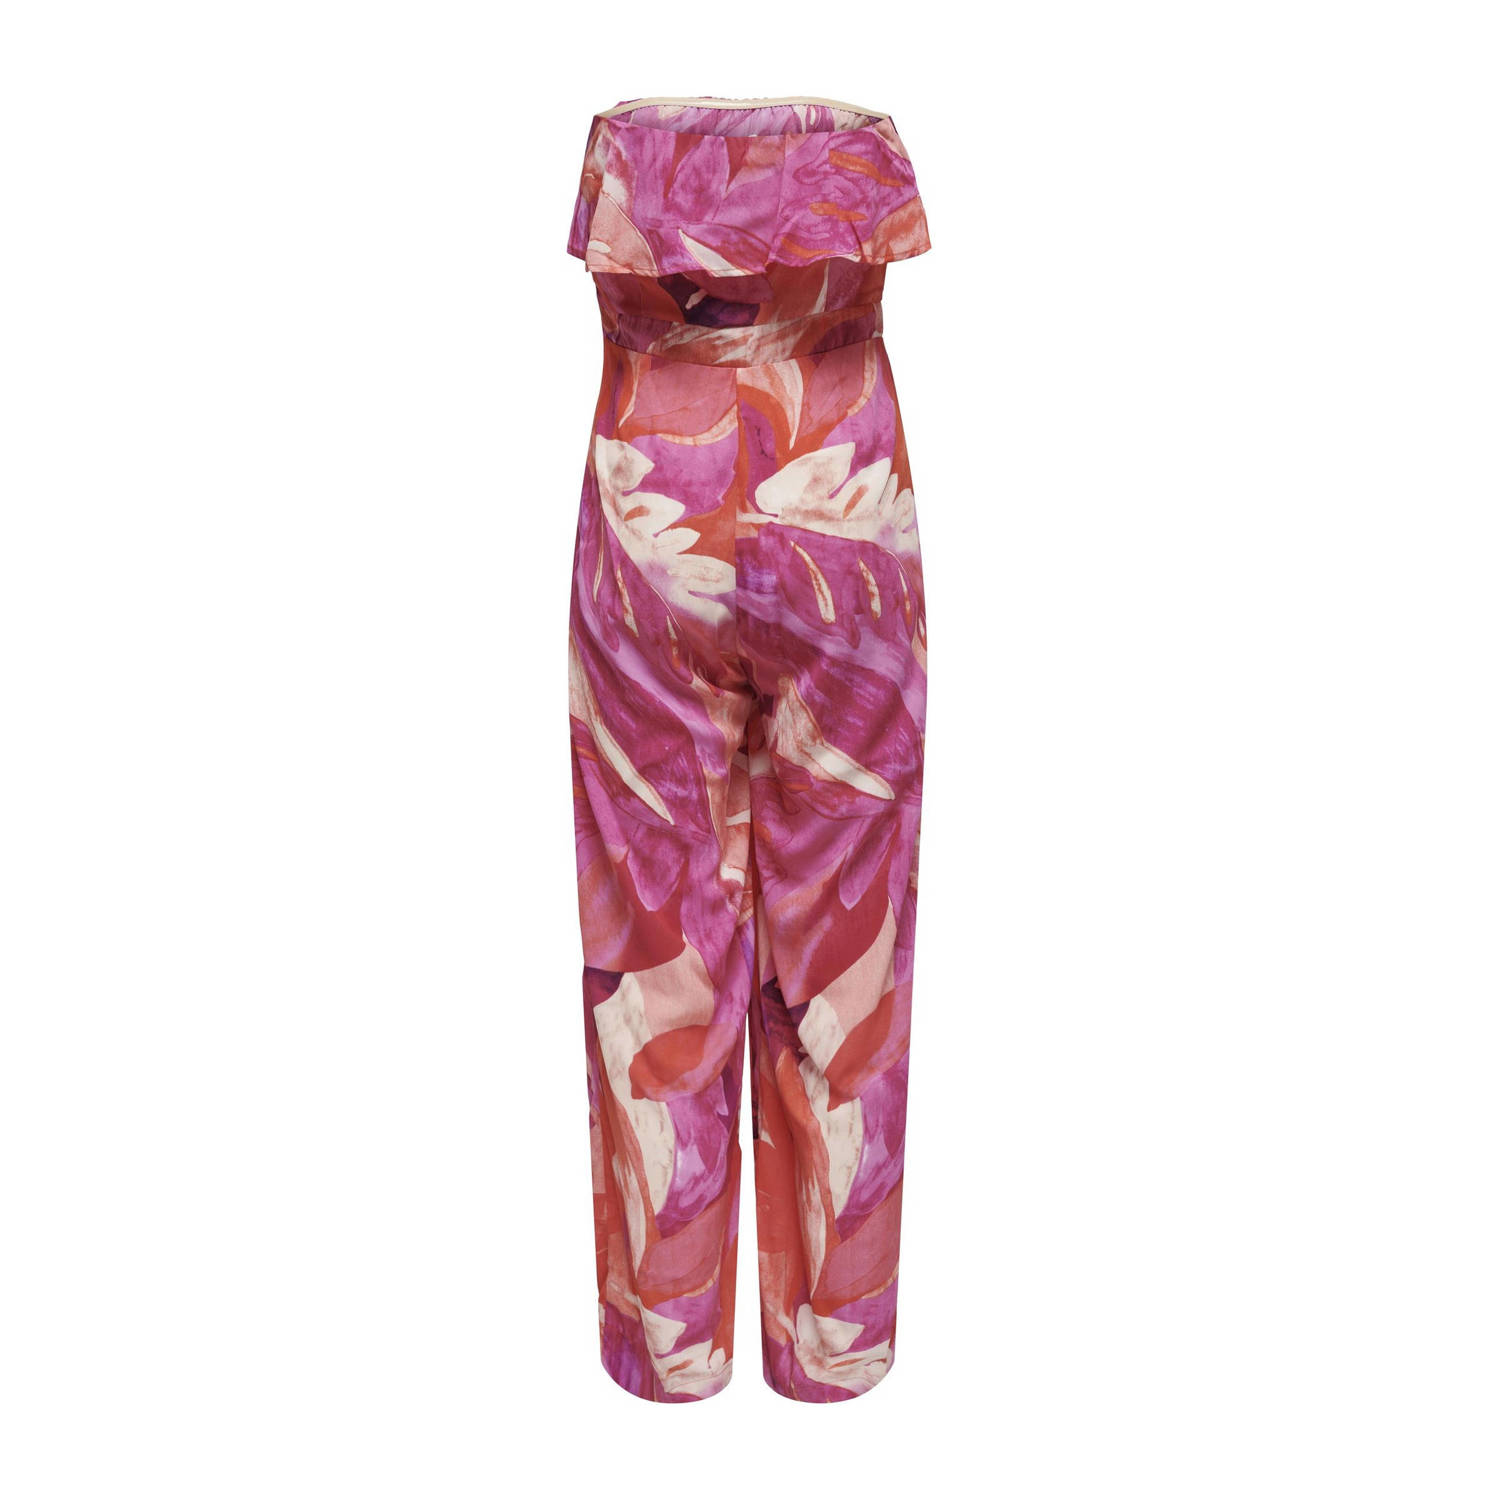 ONLY jumpsuit met all over print paars roze